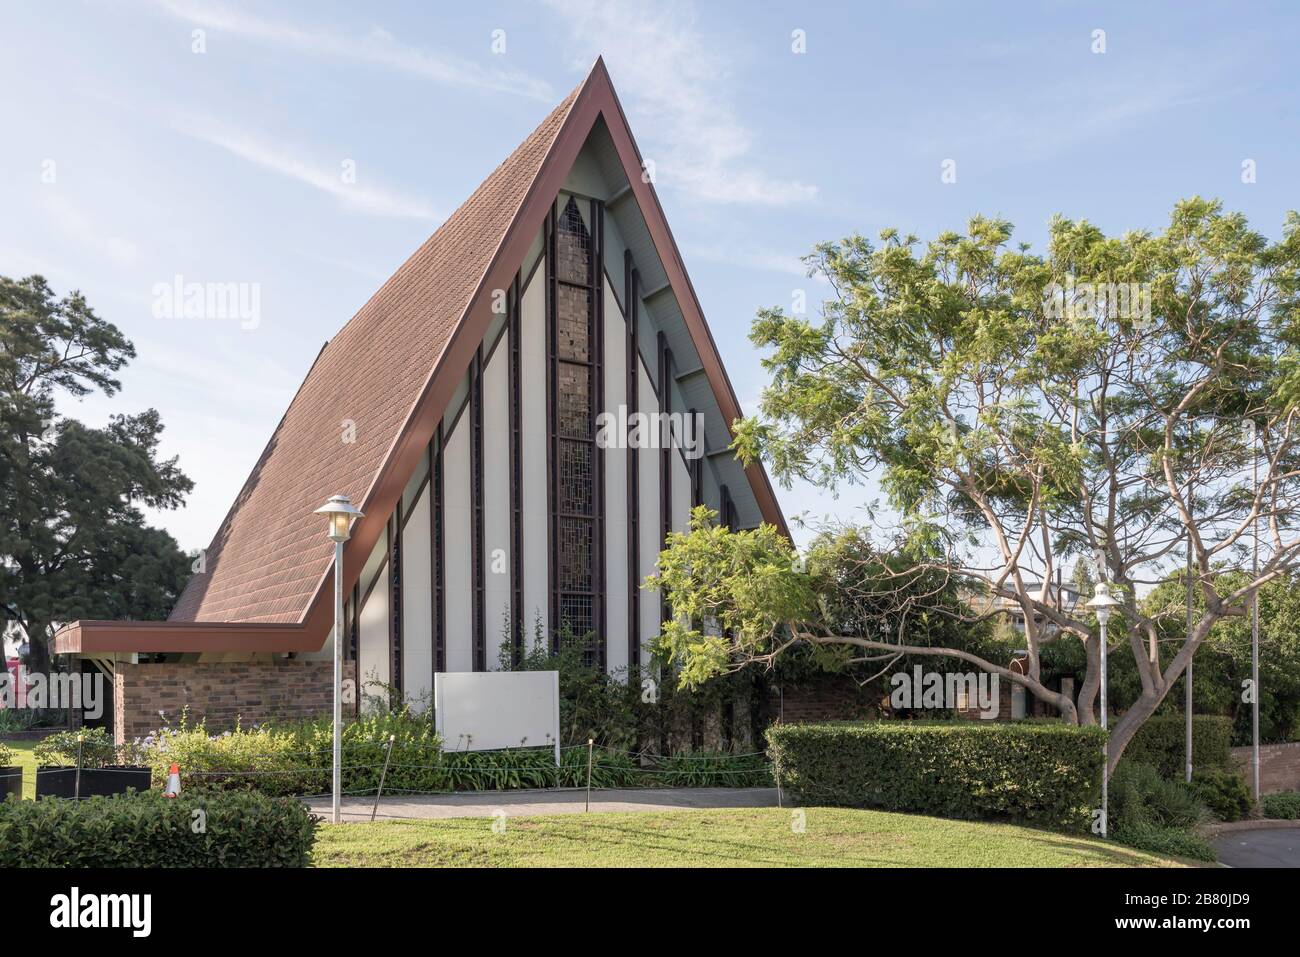 The former Christian only but now multi-denominational A frame chapel at Royal North Shore Hospital in St Leonards, Sydney, New South Wales, Australia Stock Photo